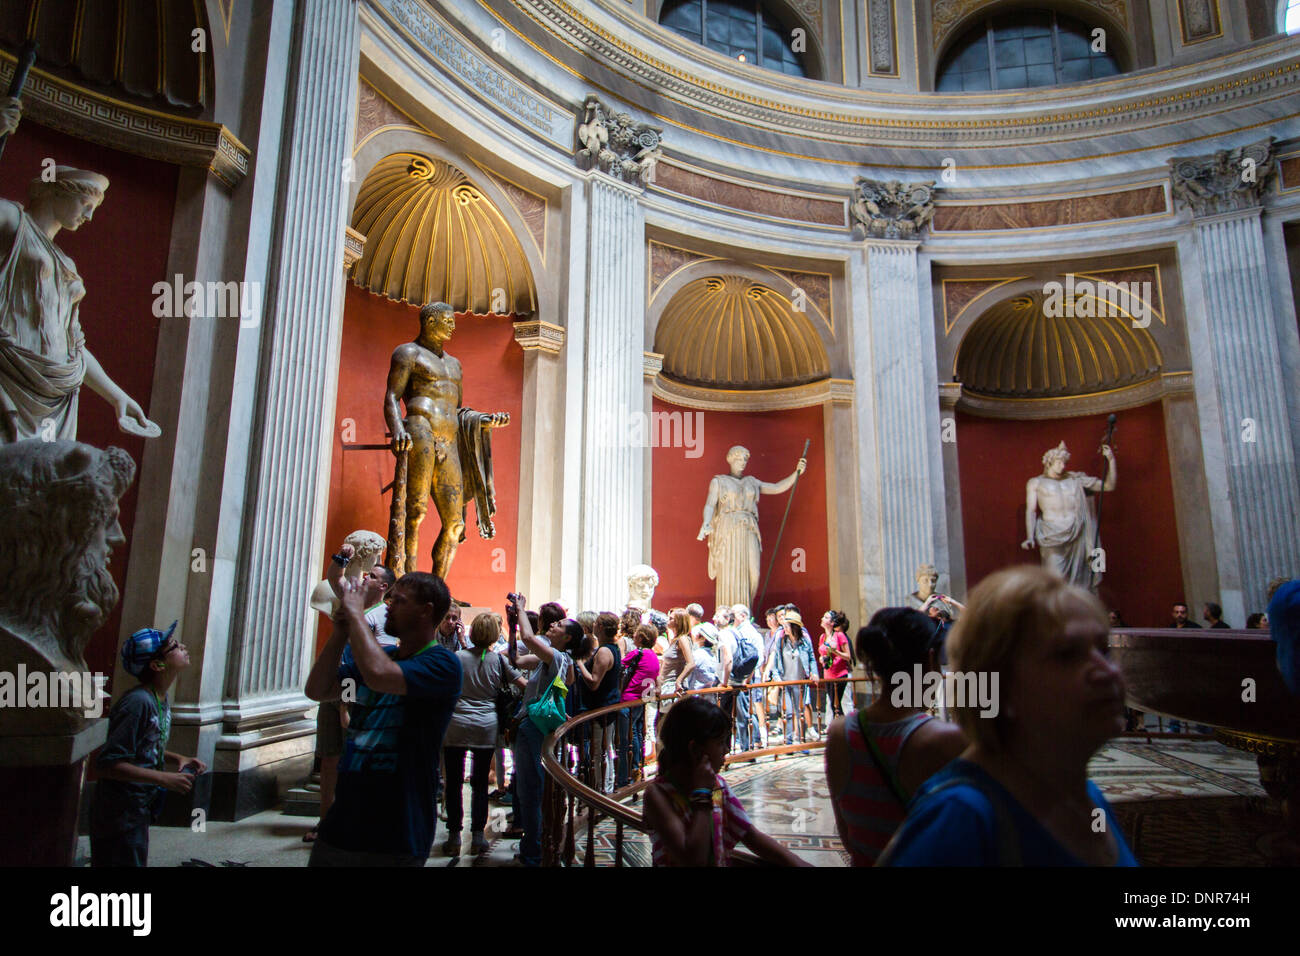 Statues in the Museo Pio-Clementino, Vatican Museums, Vatican City, Rome, Italy, Europe Stock Photo